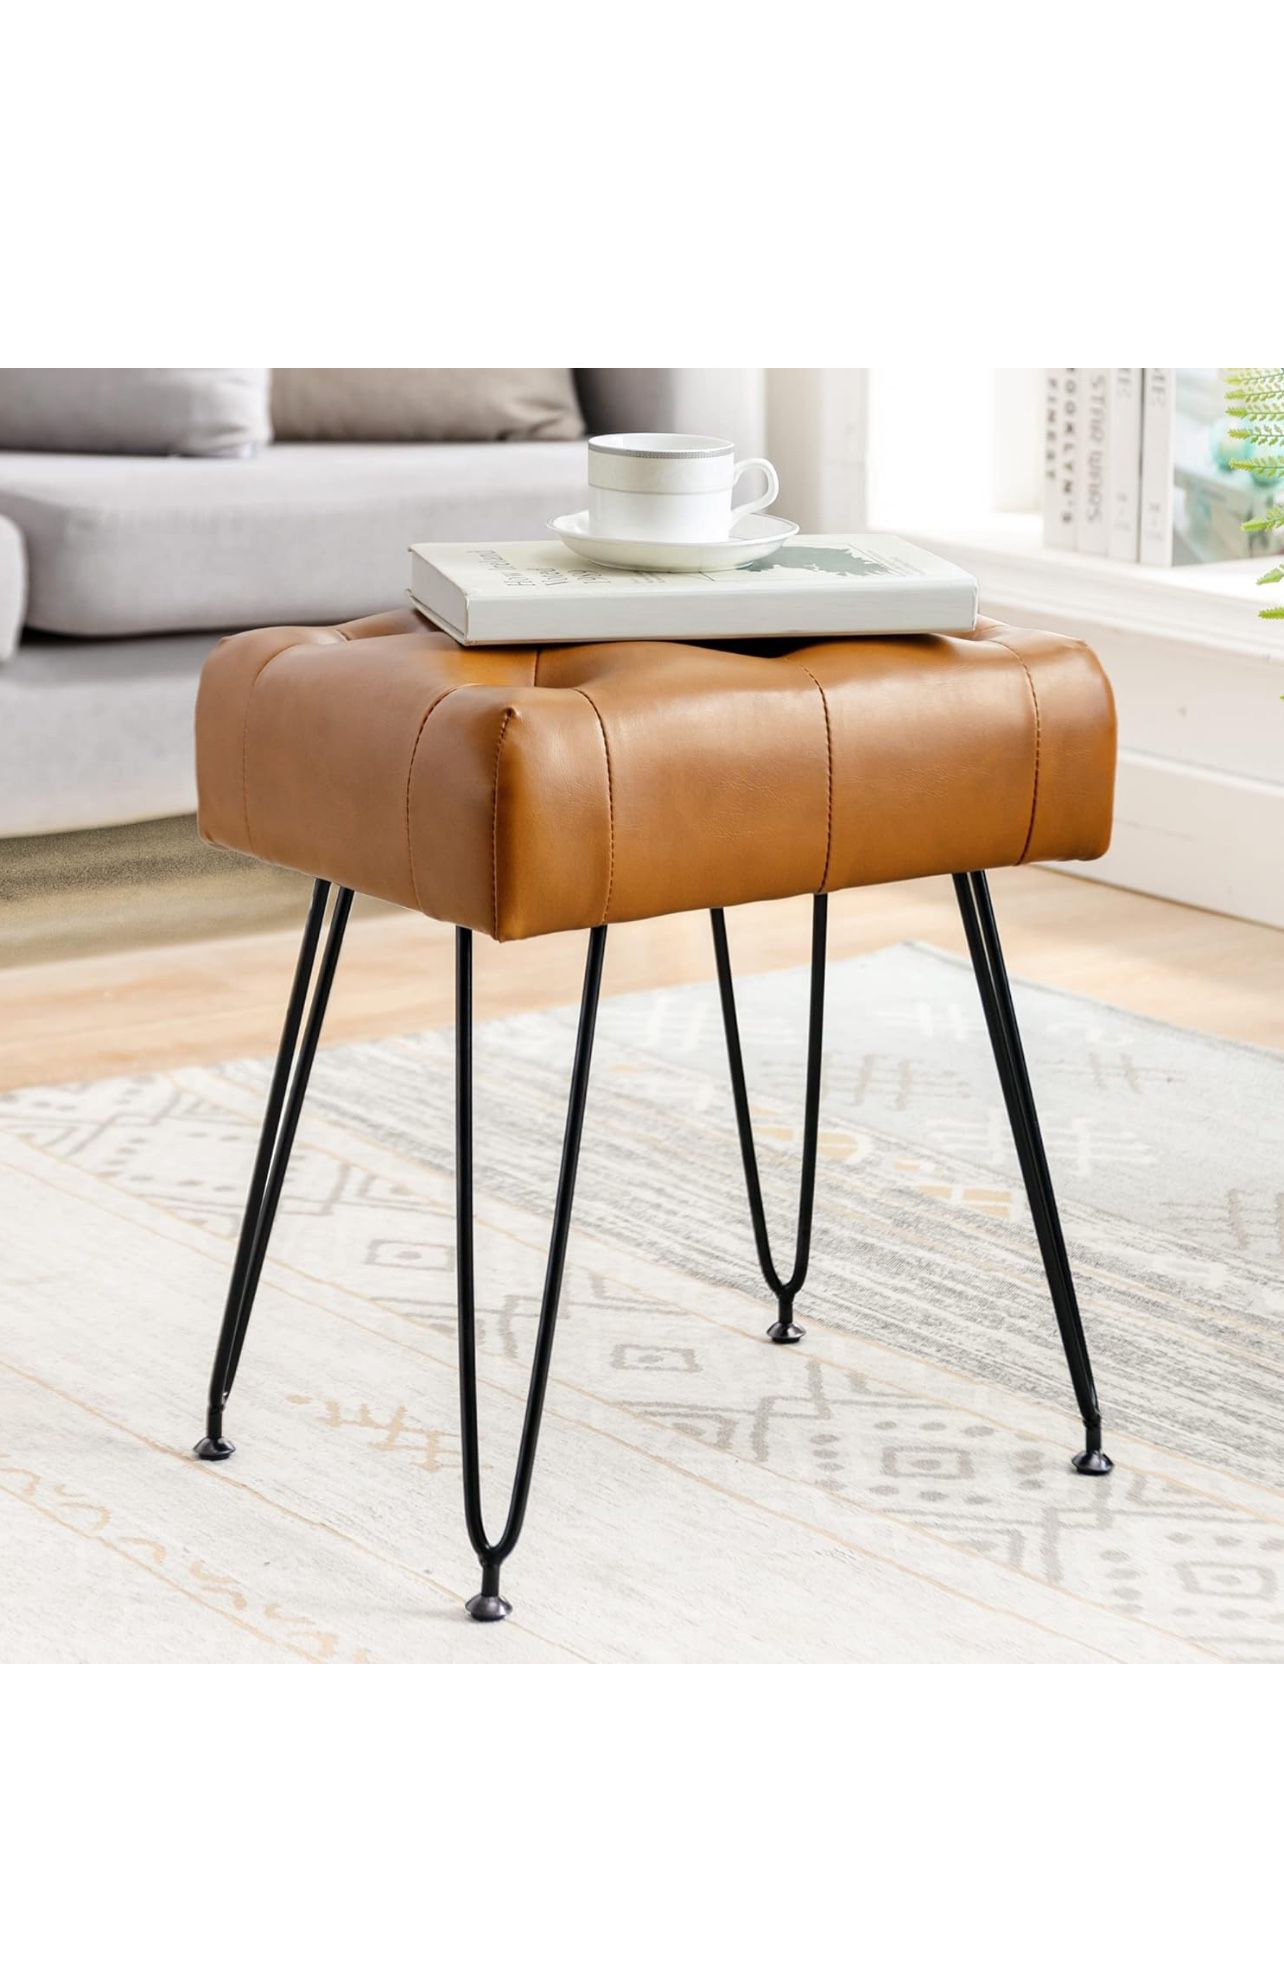 LUE BONA Modern Faux Leather Rectangle Vanity Stool, Vanity Chair for Makeup Room, Whiskey Brown Ottoman